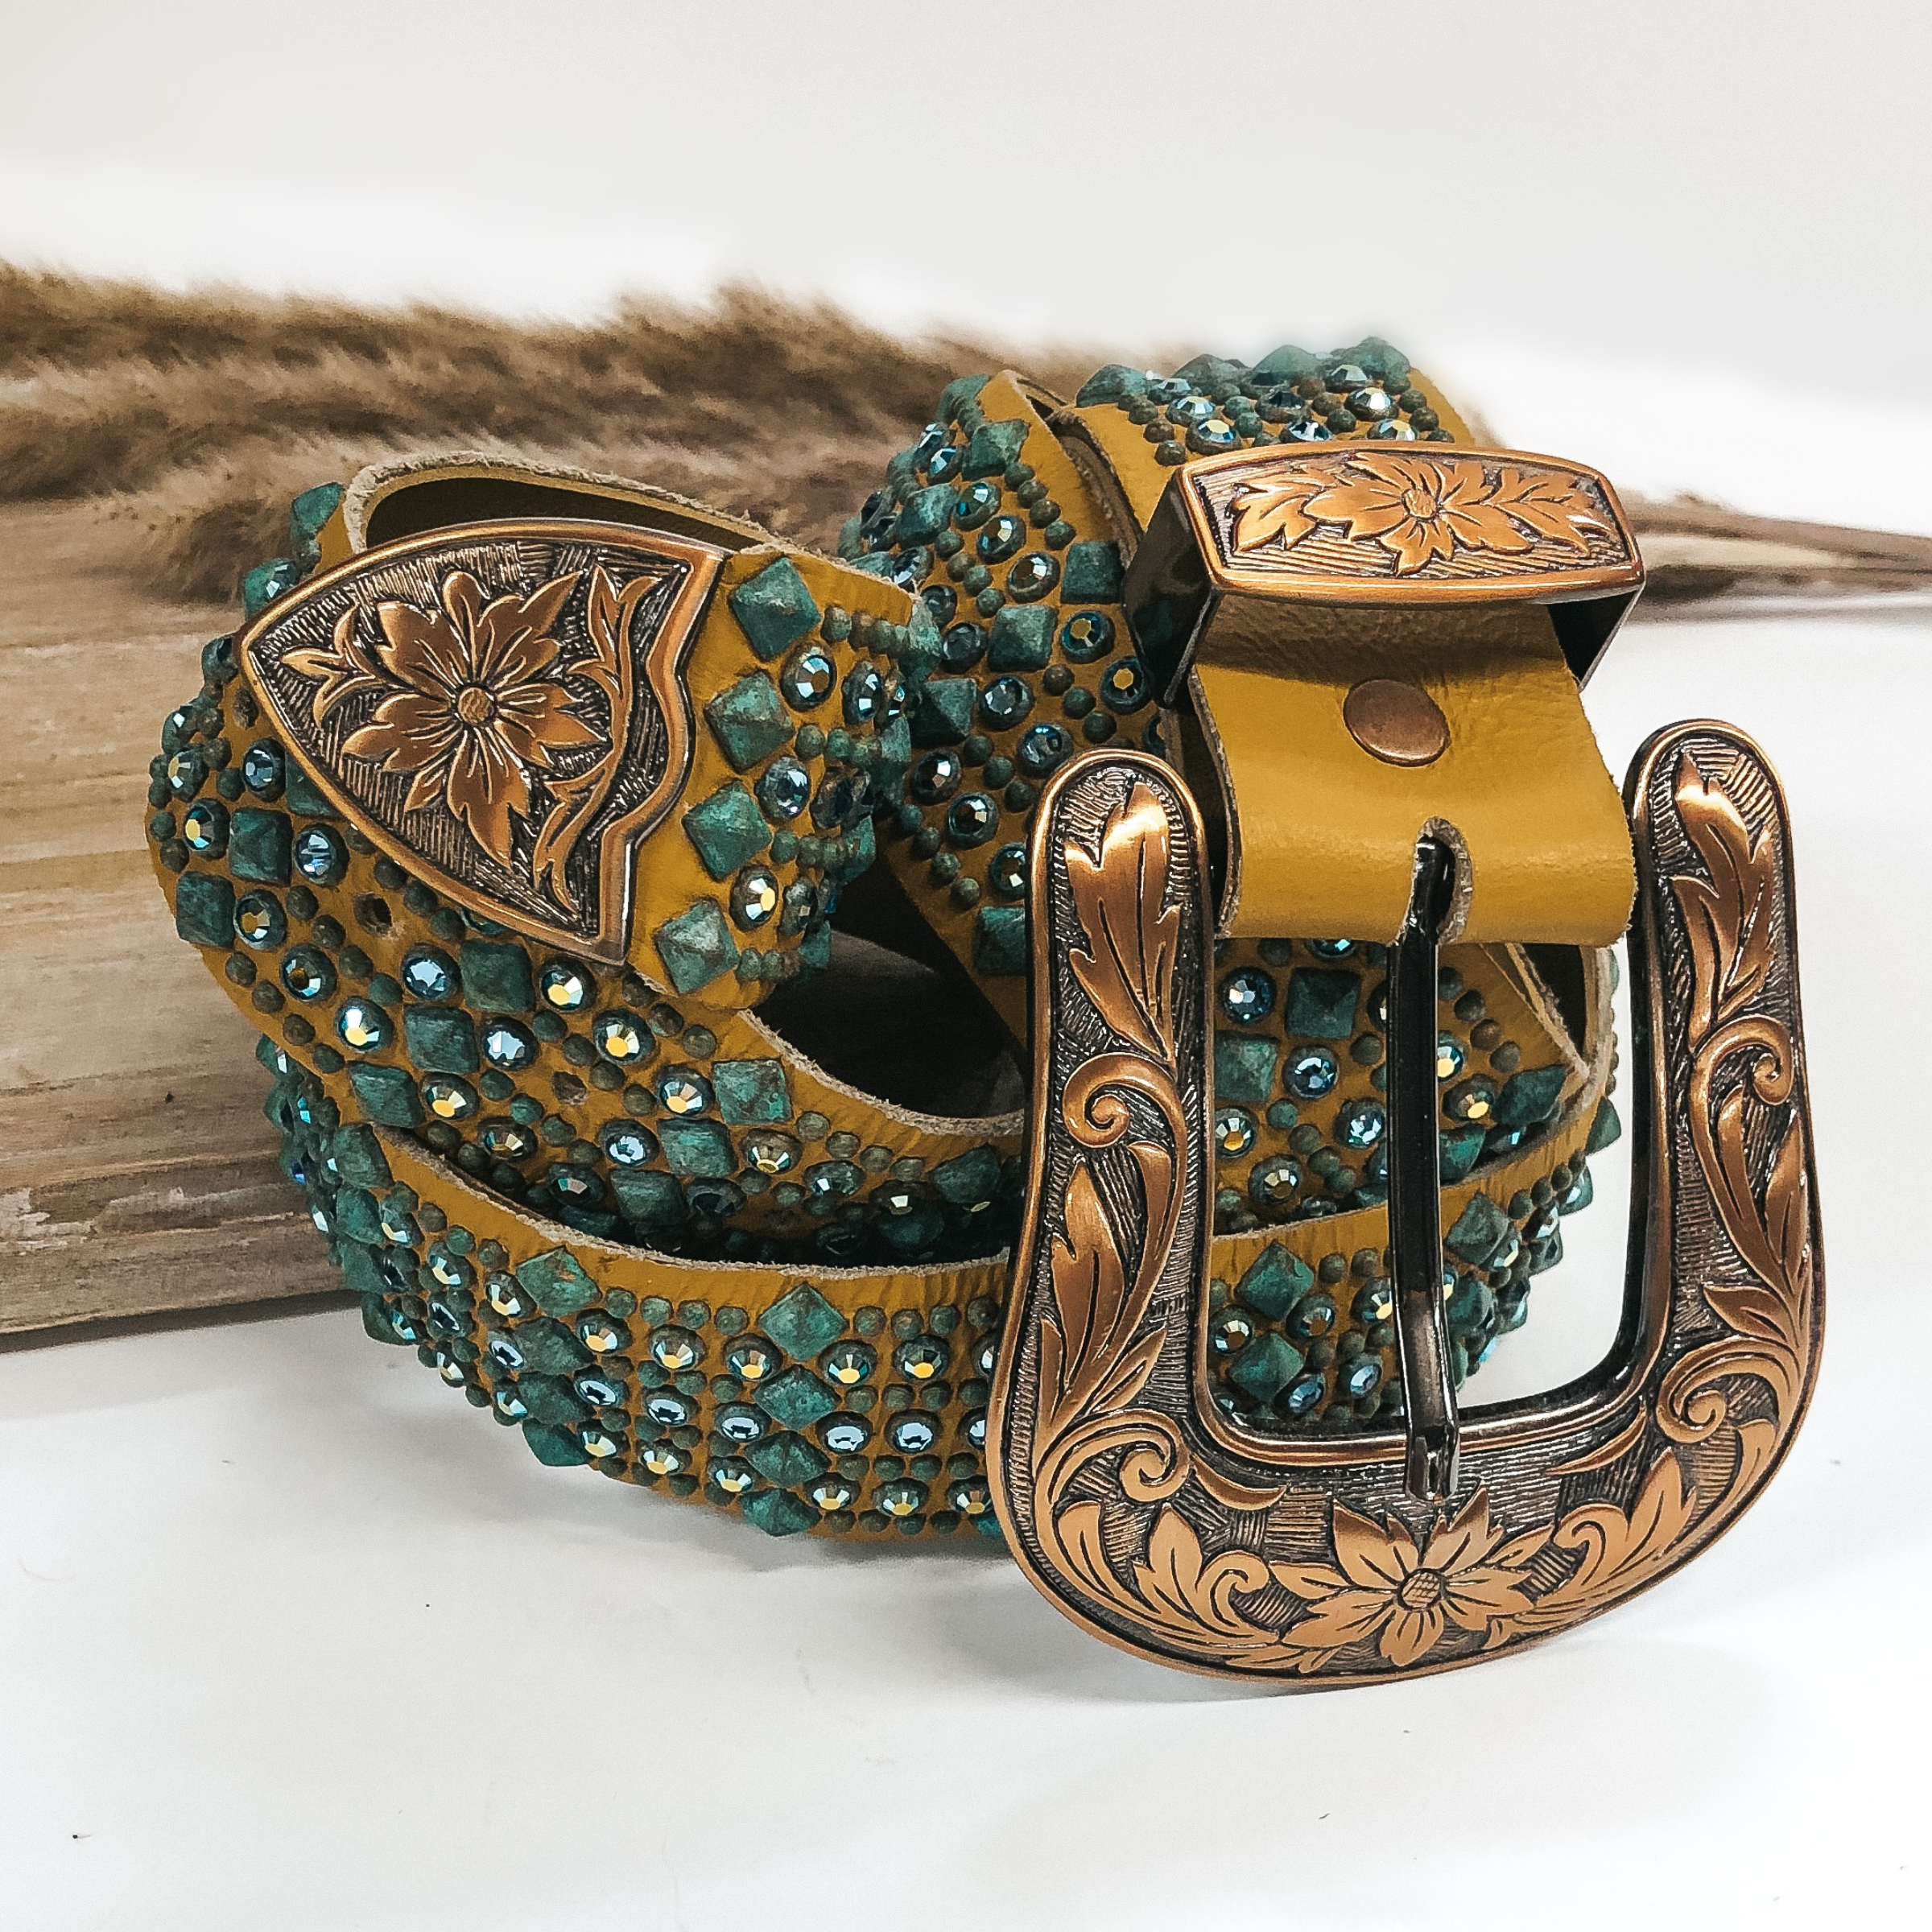 Kippys | Tan Leather Belt with Bronze Buckle and Patina Stones Colored Crystals - Giddy Up Glamour Boutique